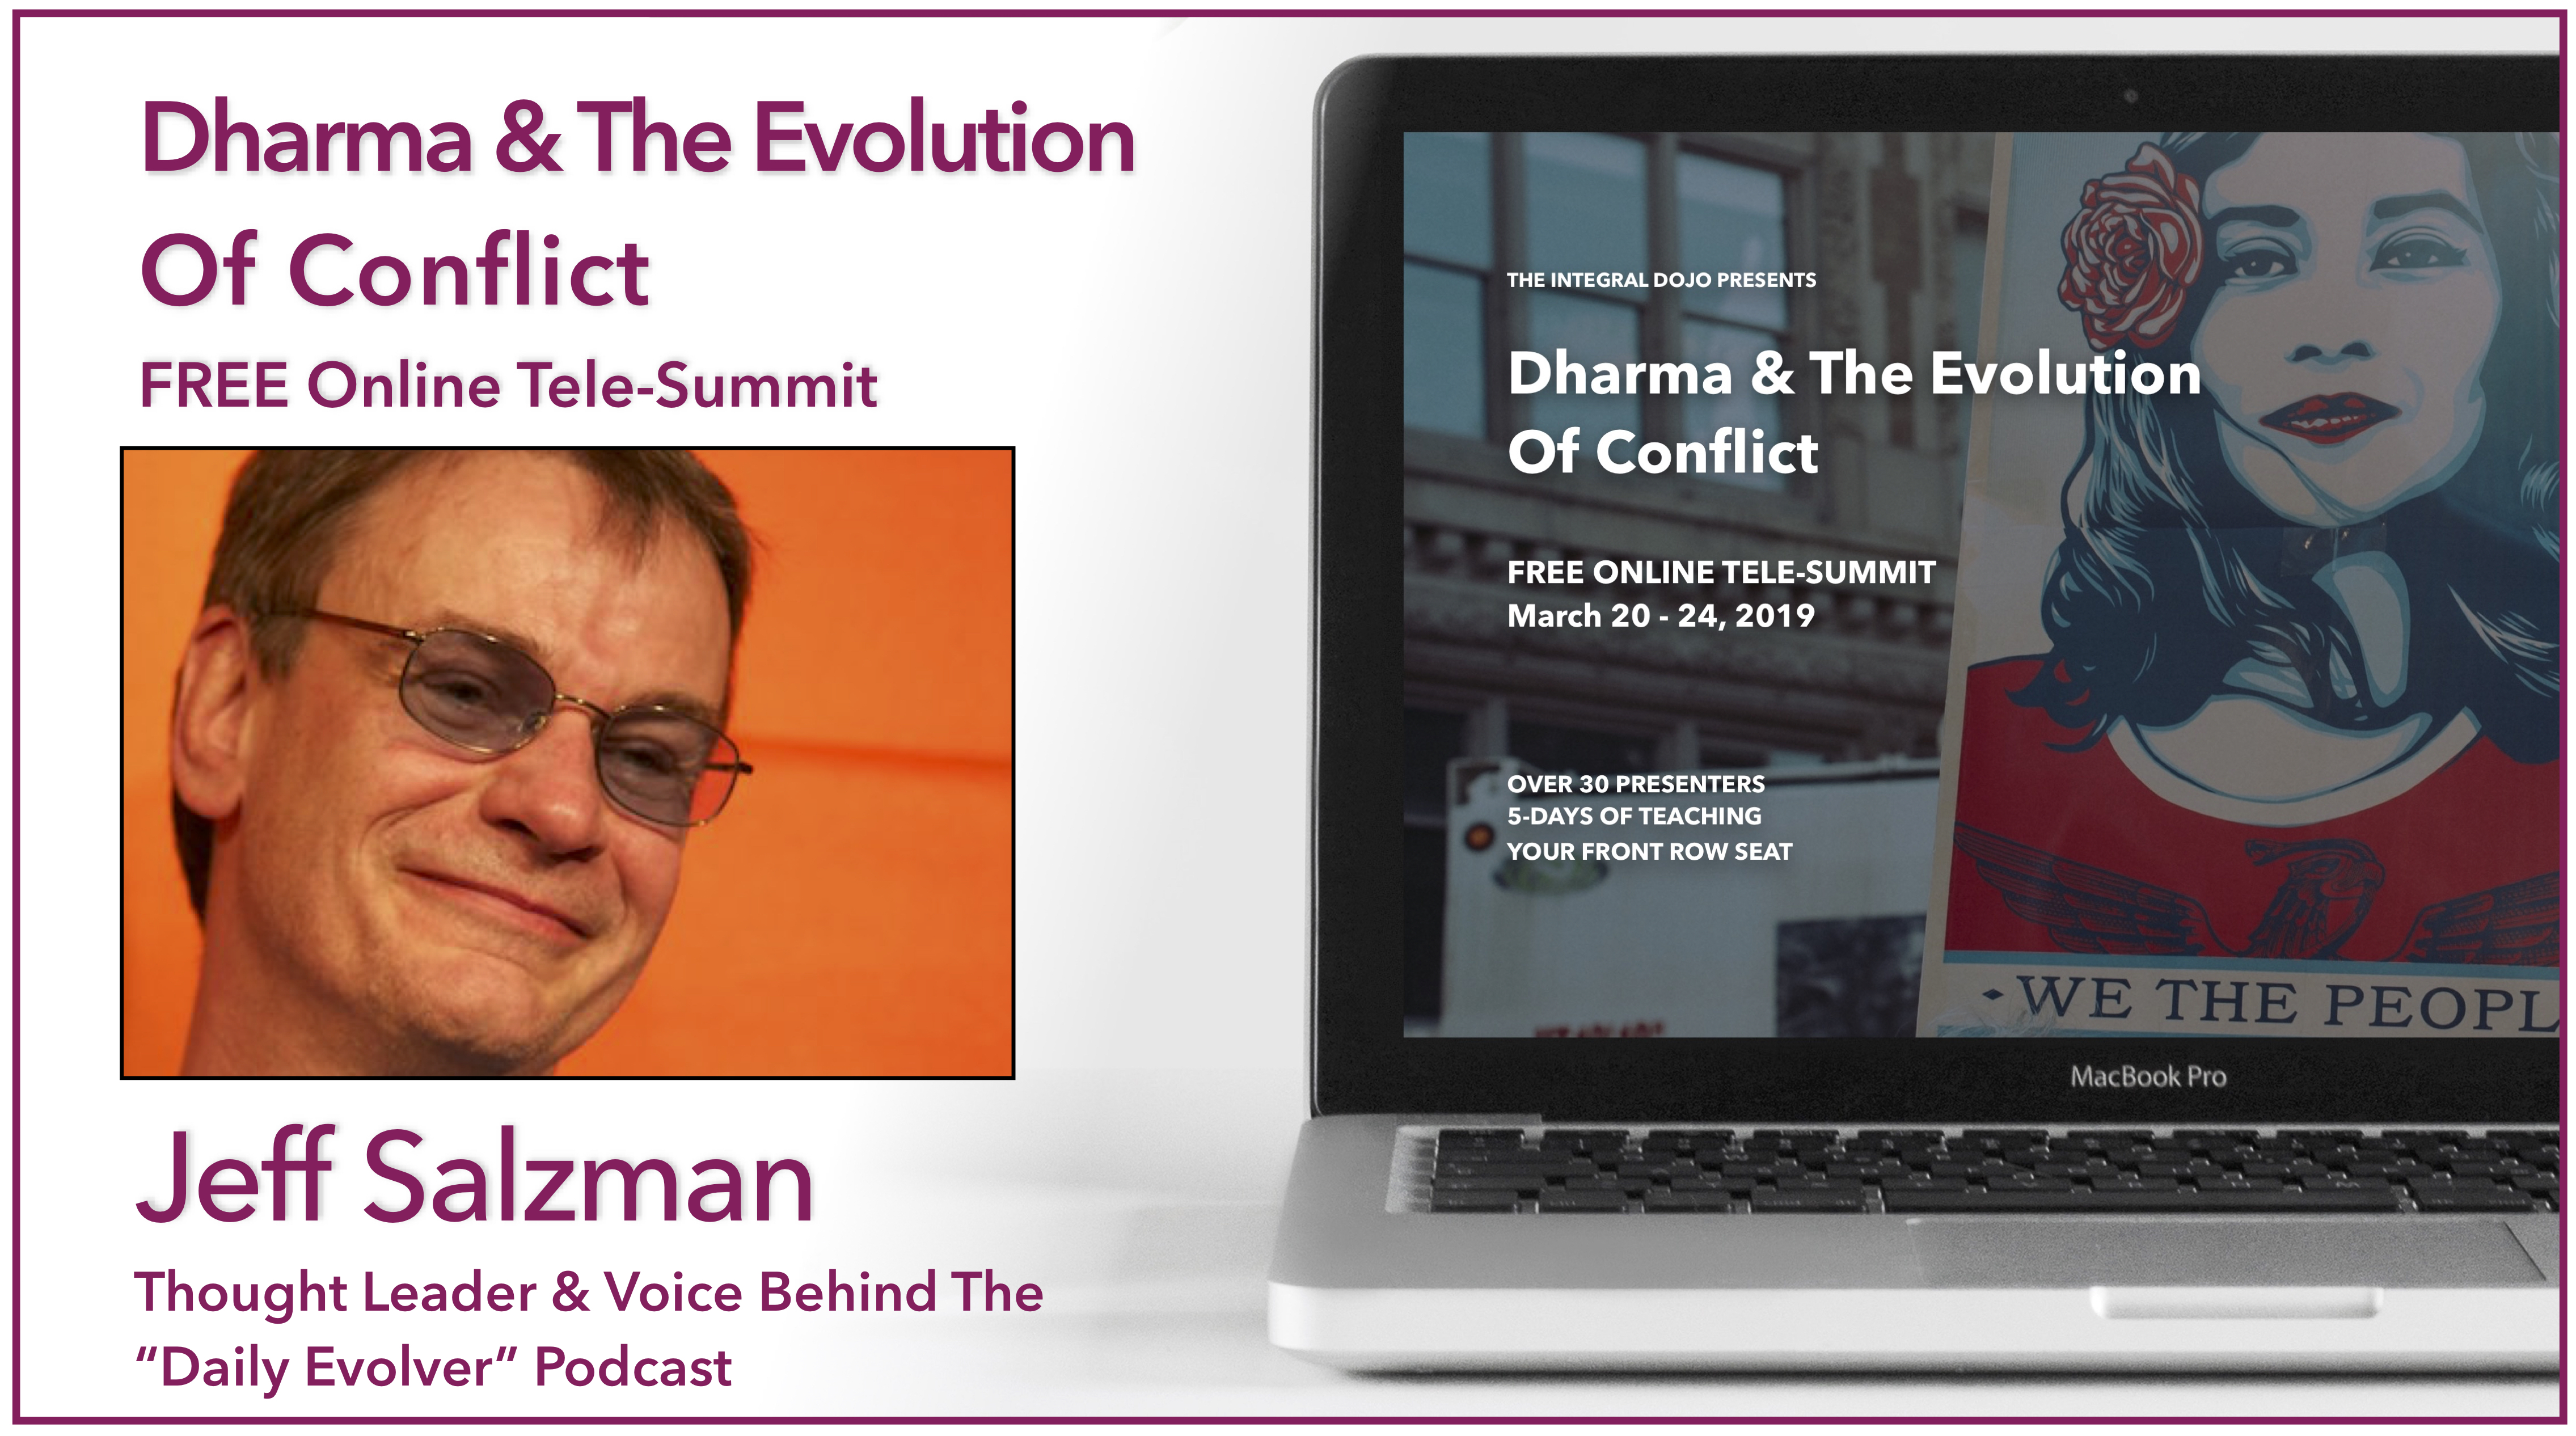 Dharma & The Evolution Of Conflict Tele-Summit